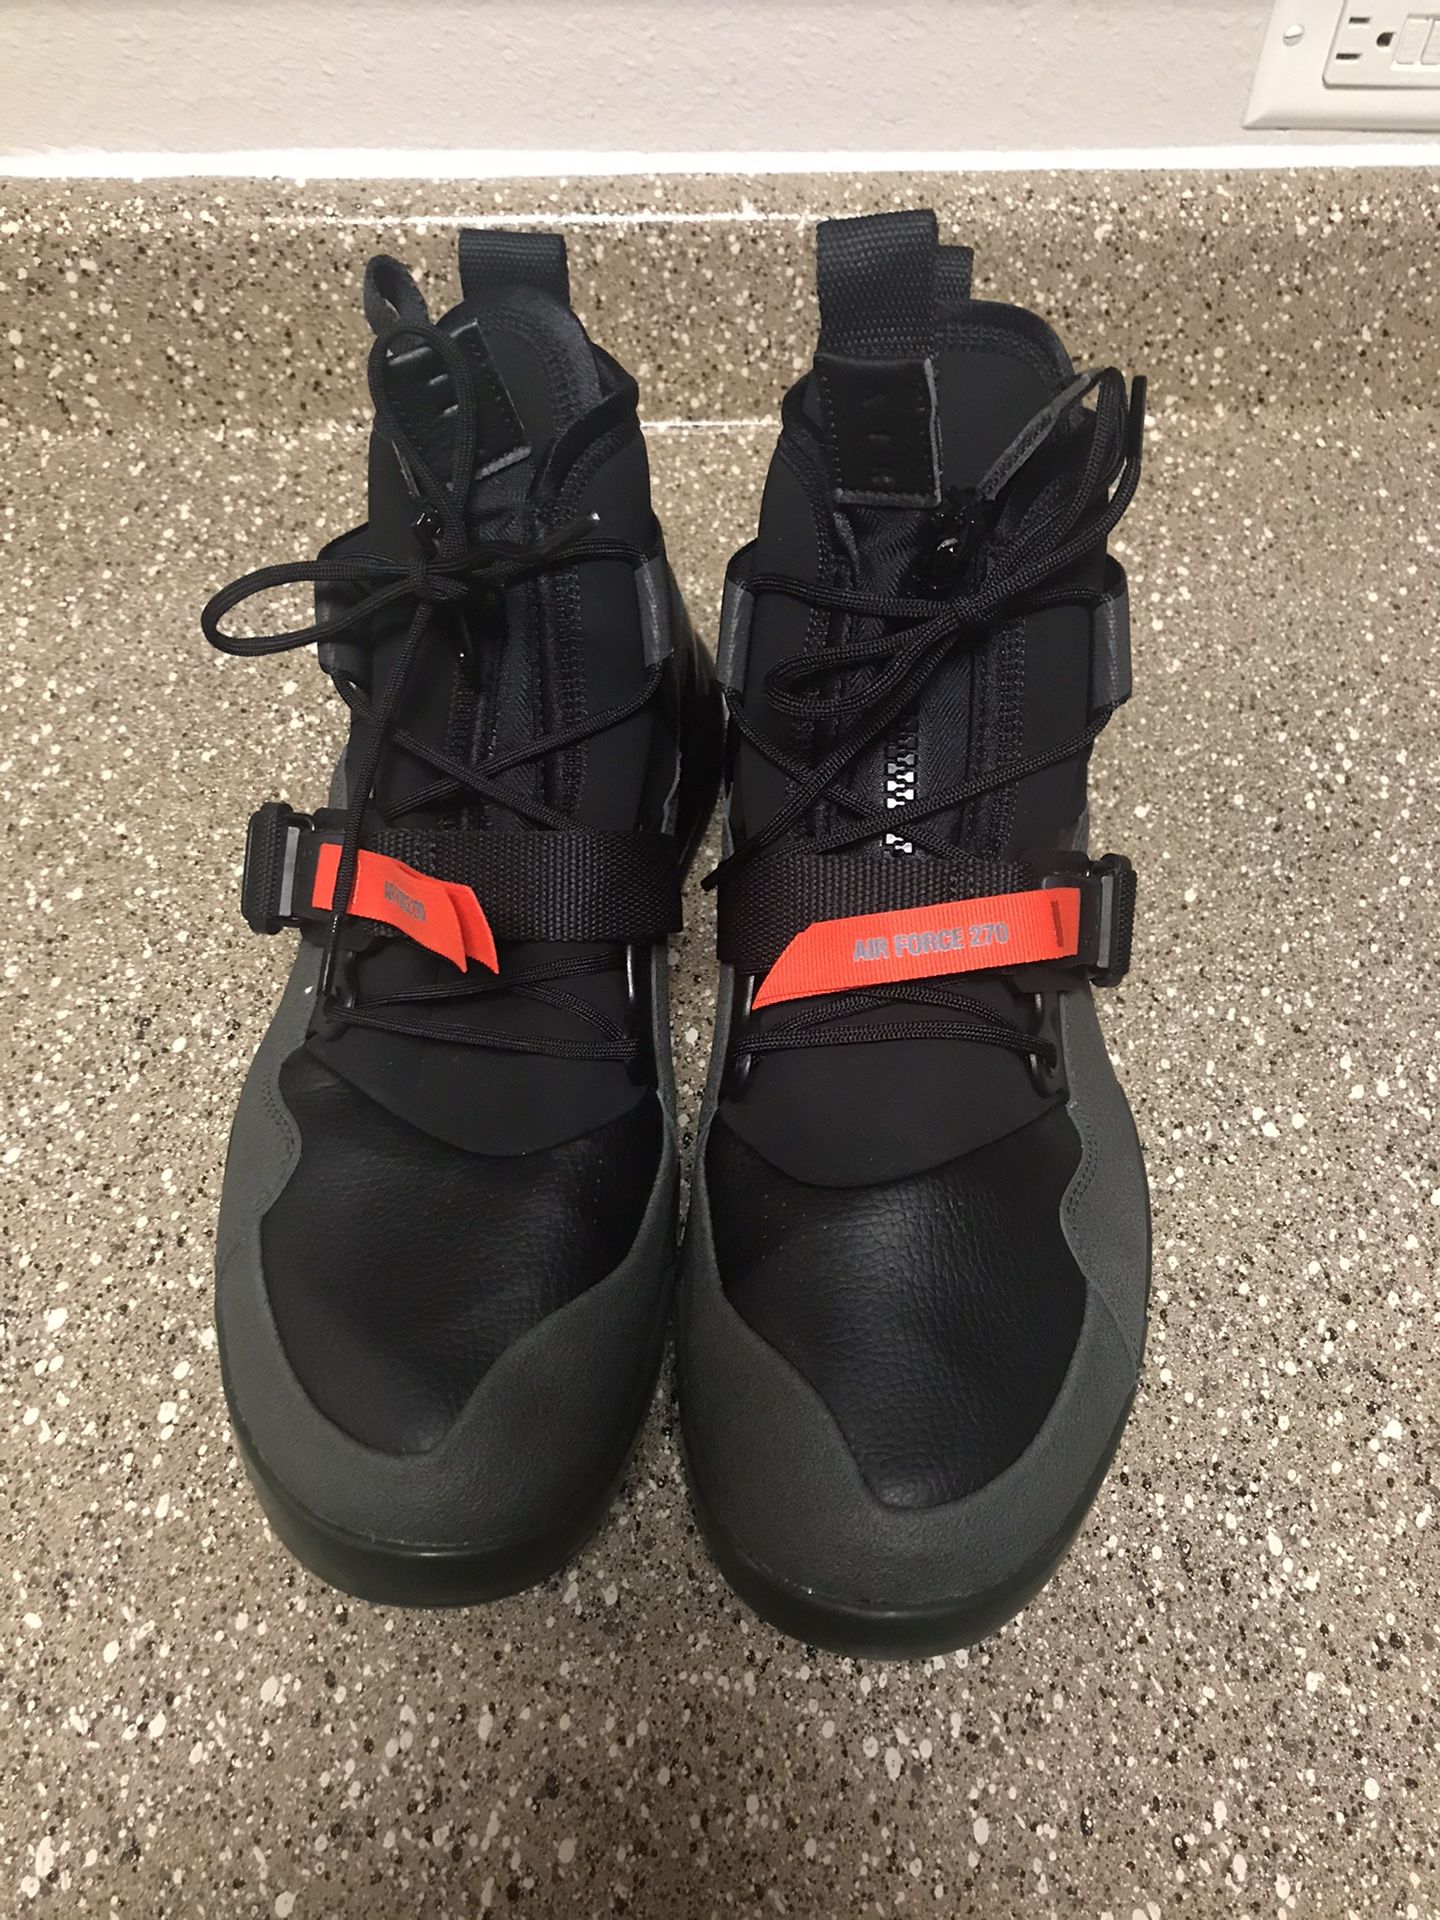 Nike Air Force 270 Utility size 13